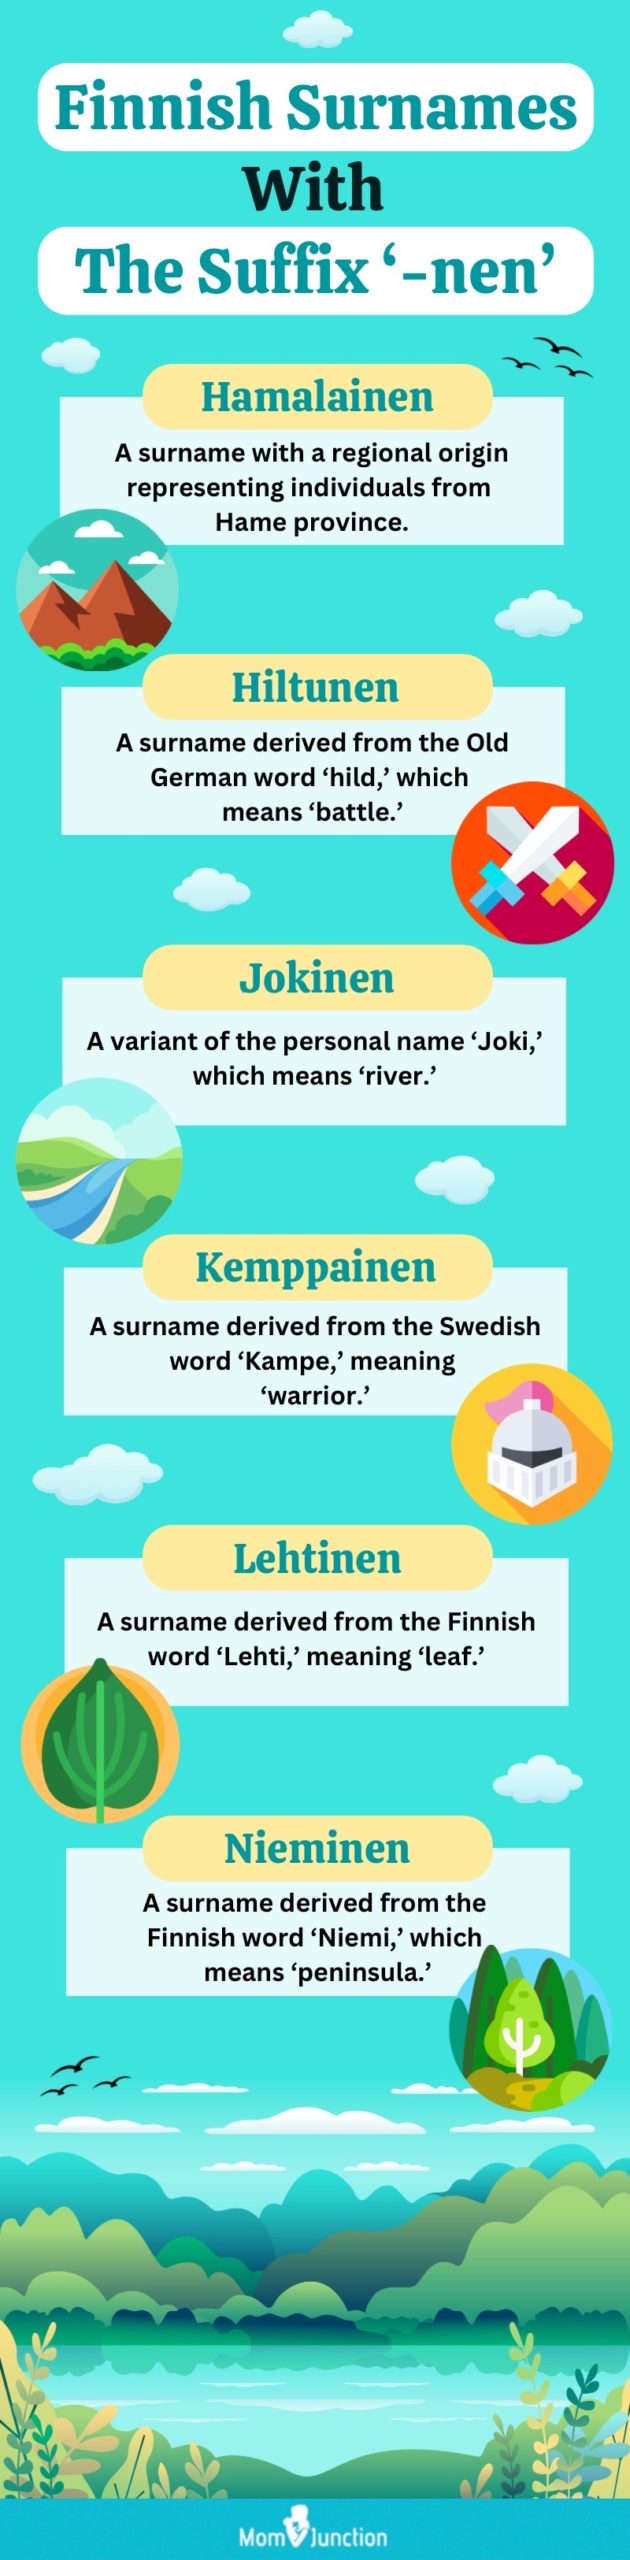 finnish surnames [infographic]